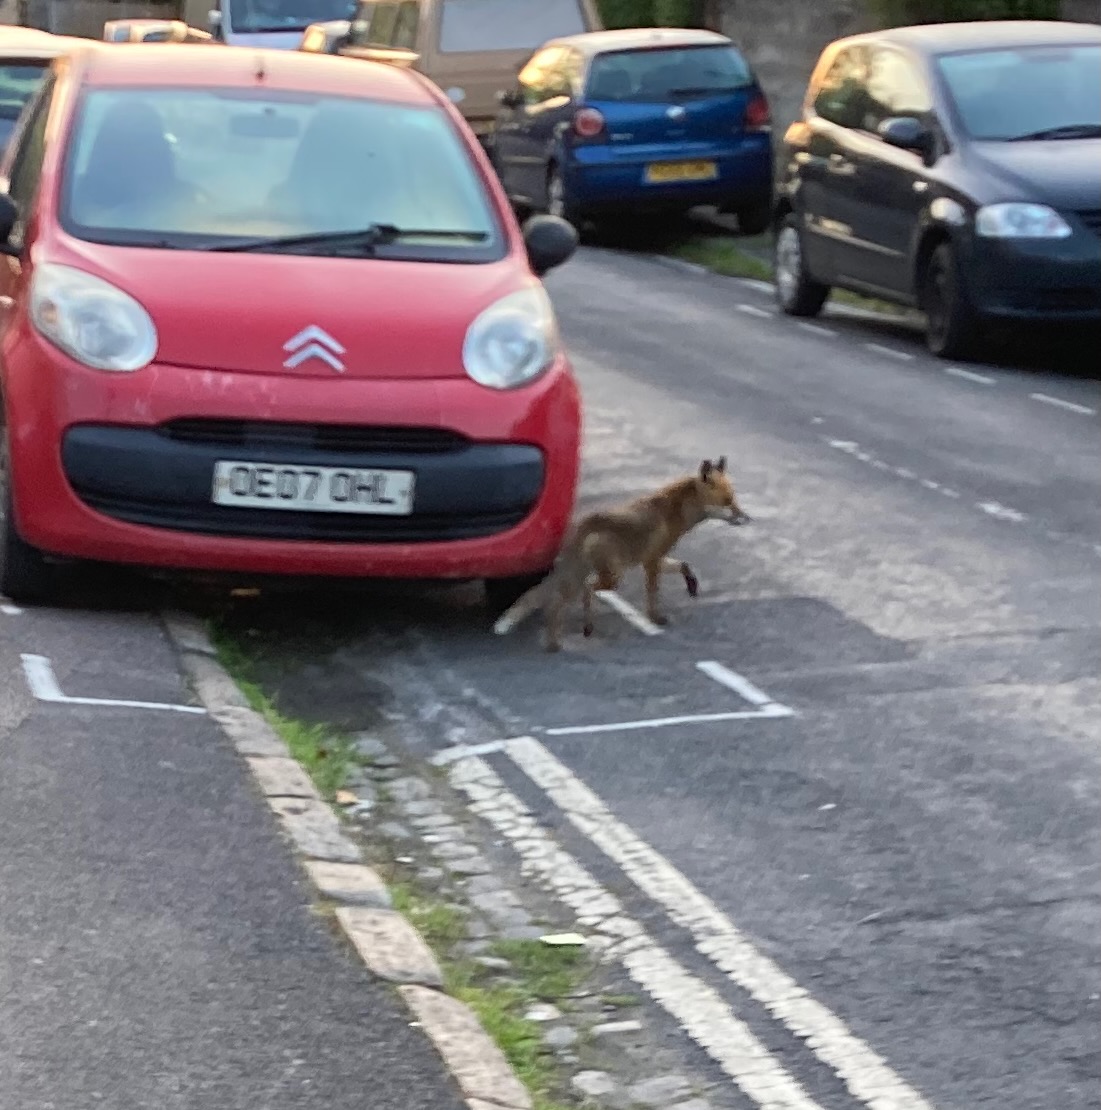 Mangy fox moving beyond red car into the street